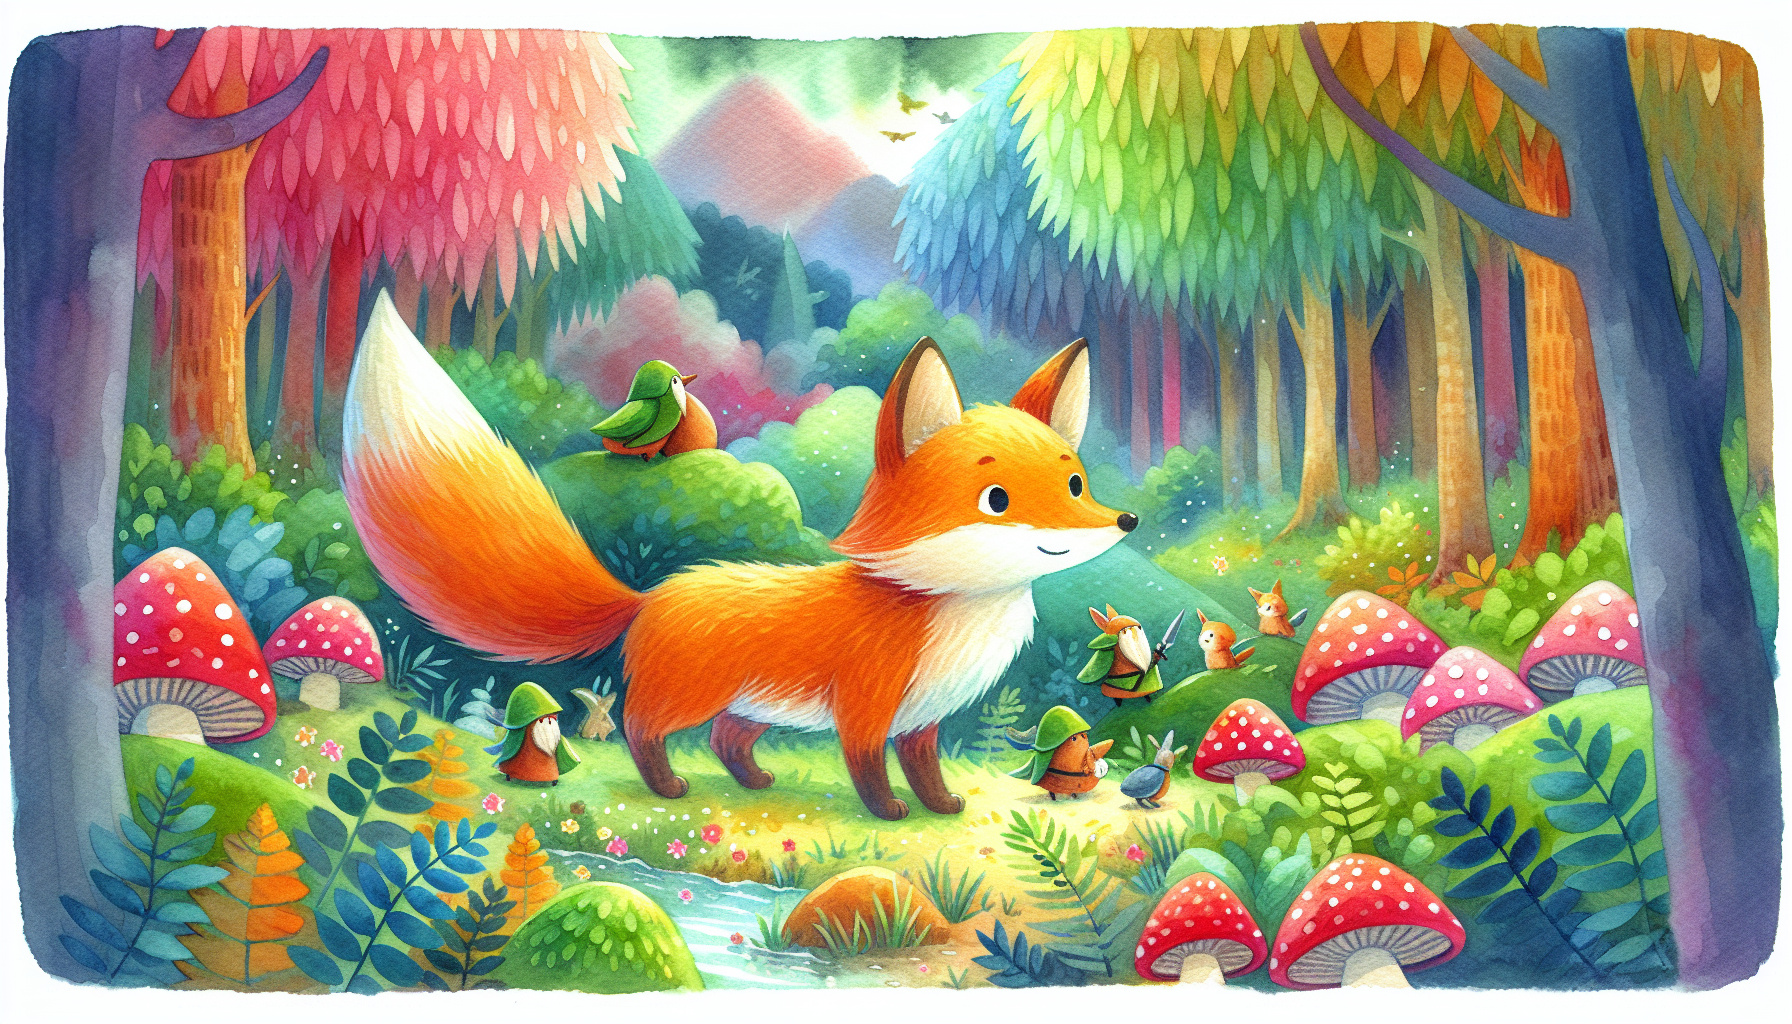 The Brave Fox and the Mysterious Forest